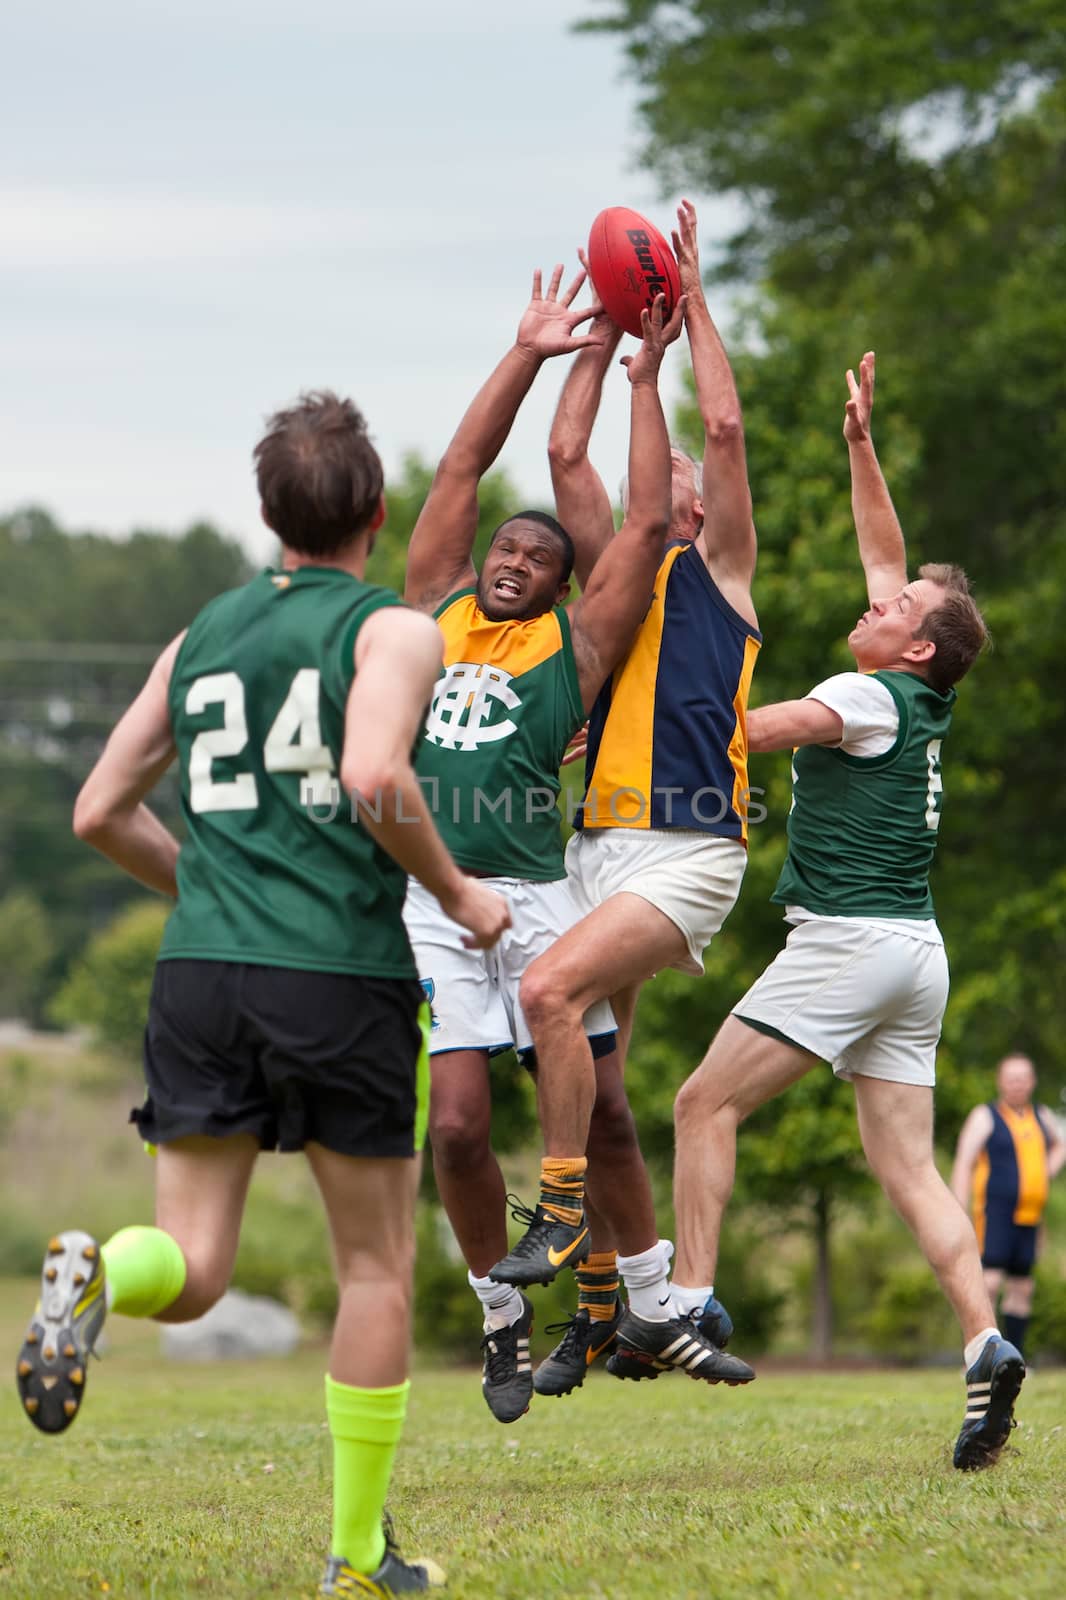 Roswell, GA, USA - May 17, 2014:  Players jump and compete for the ball in an amateur game of Australian Rules Football in a Roswell city park.